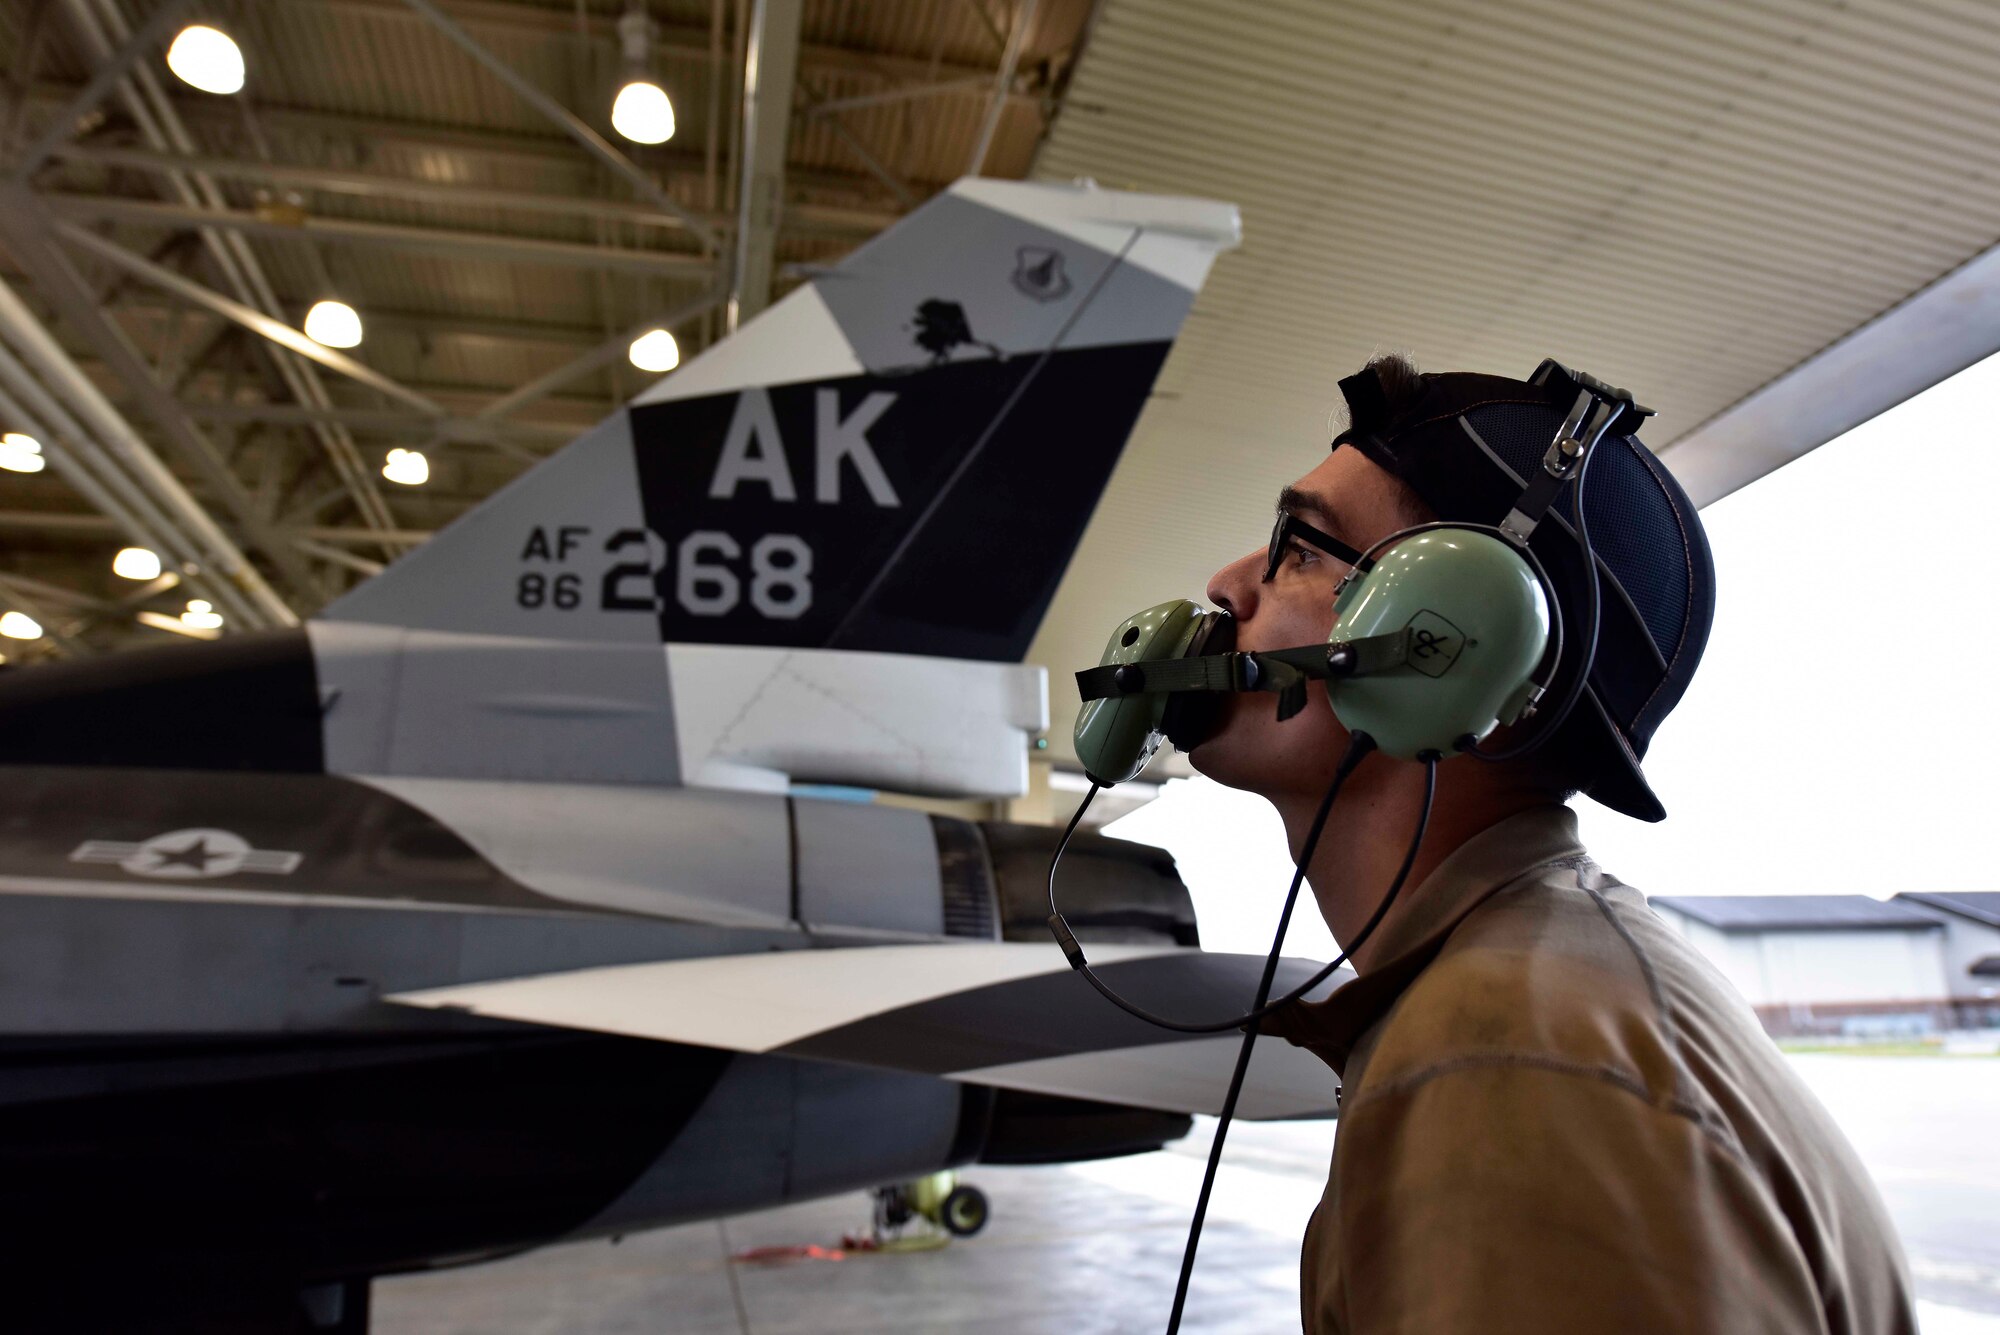 U.S. Air Force Airman 1st Class Jacob Camacho, an 18th Aircraft Maintenance Unit (AMU) crew chief, conducts preflight checks on an F-16 Fighting Falcon aircraft during RED FLAG-Alaska 20-3 on Eielson Air Force Base, Alaska, Aug. 4, 2020. The 354th Maintenance Group provides aircraft and munitions maintenance support to the 354th Fighter Wing's F-35 Lightning II fifth-generation aircraft, F-16 Fighting Falcon aggressor aircraft, RED FLAG-Alaska, tanker task force, transient and special mission aircraft operating at Eielson AFB. (U.S. Air Force photo by Senior Airman Beaux Hebert)